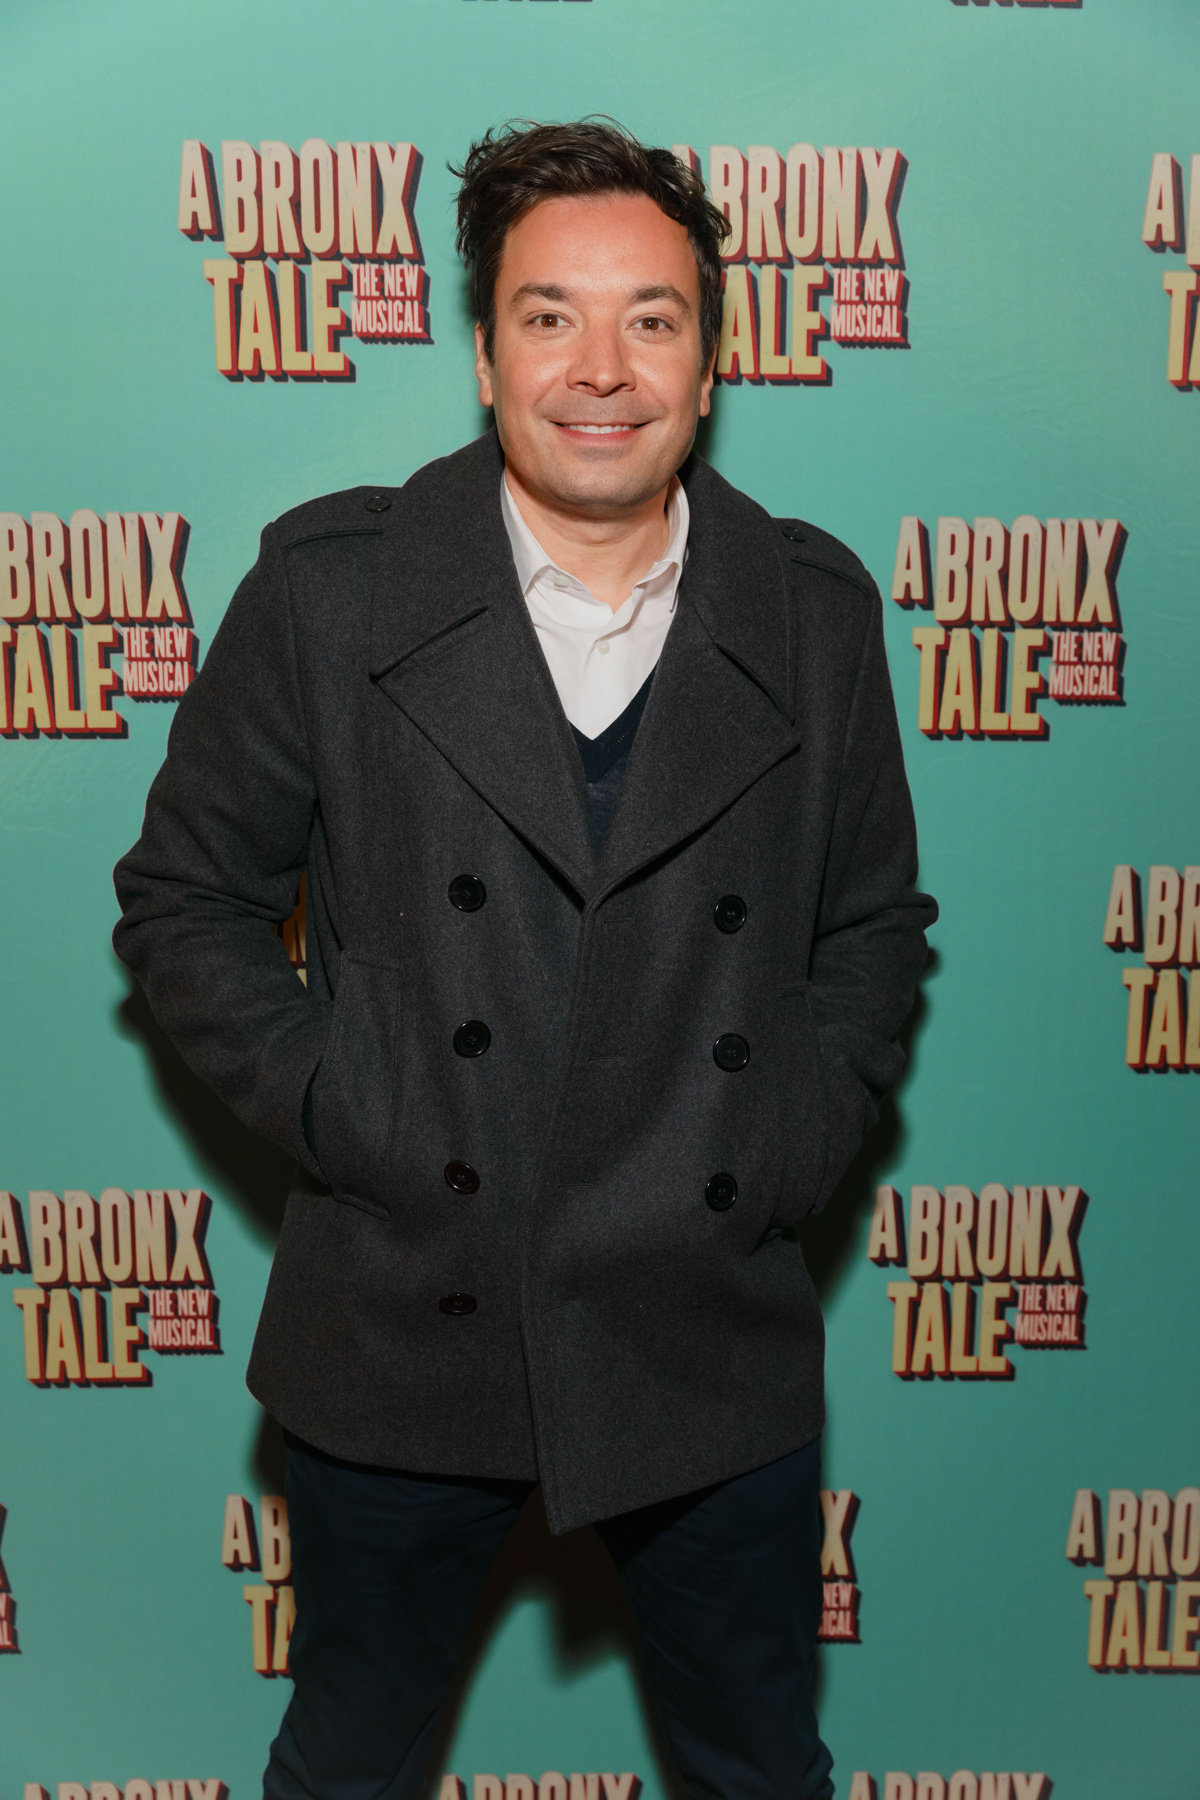 Belmont Avenue Brings the Star Power for A Bronx Tale's Broadway ...